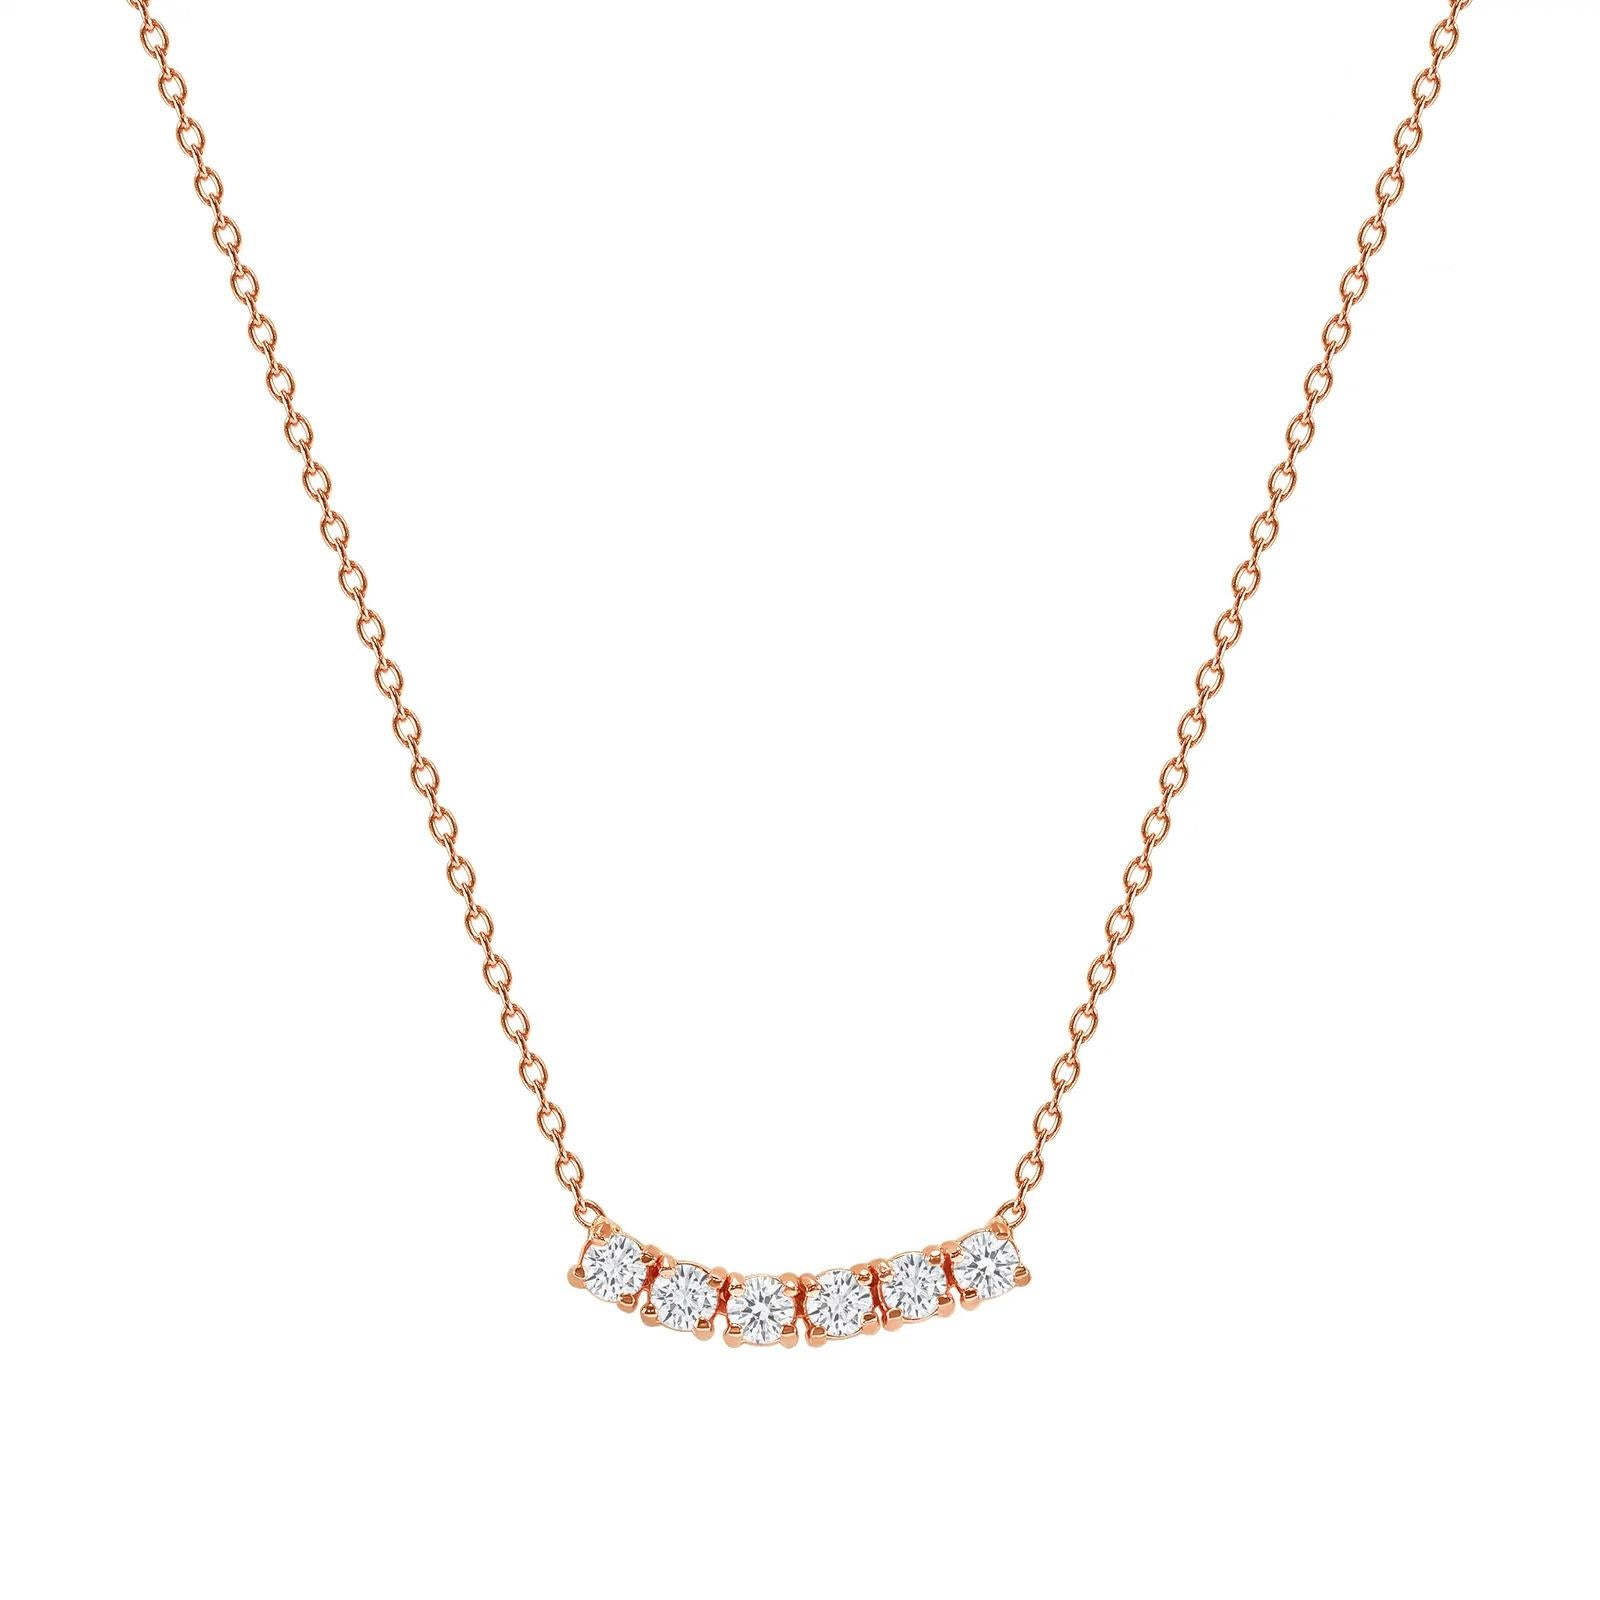 This petite, curved diamond necklace is crafted with gorgeous 14k gold set with six round diamonds.  

Gold: 14k 
Diamond Total Carats: 1 ct
Diamond Cut: Round (6 diamonds)
Diamond Clarity: VS
Diamond Color: F
Color: Rose Gold
Necklace Length: 20